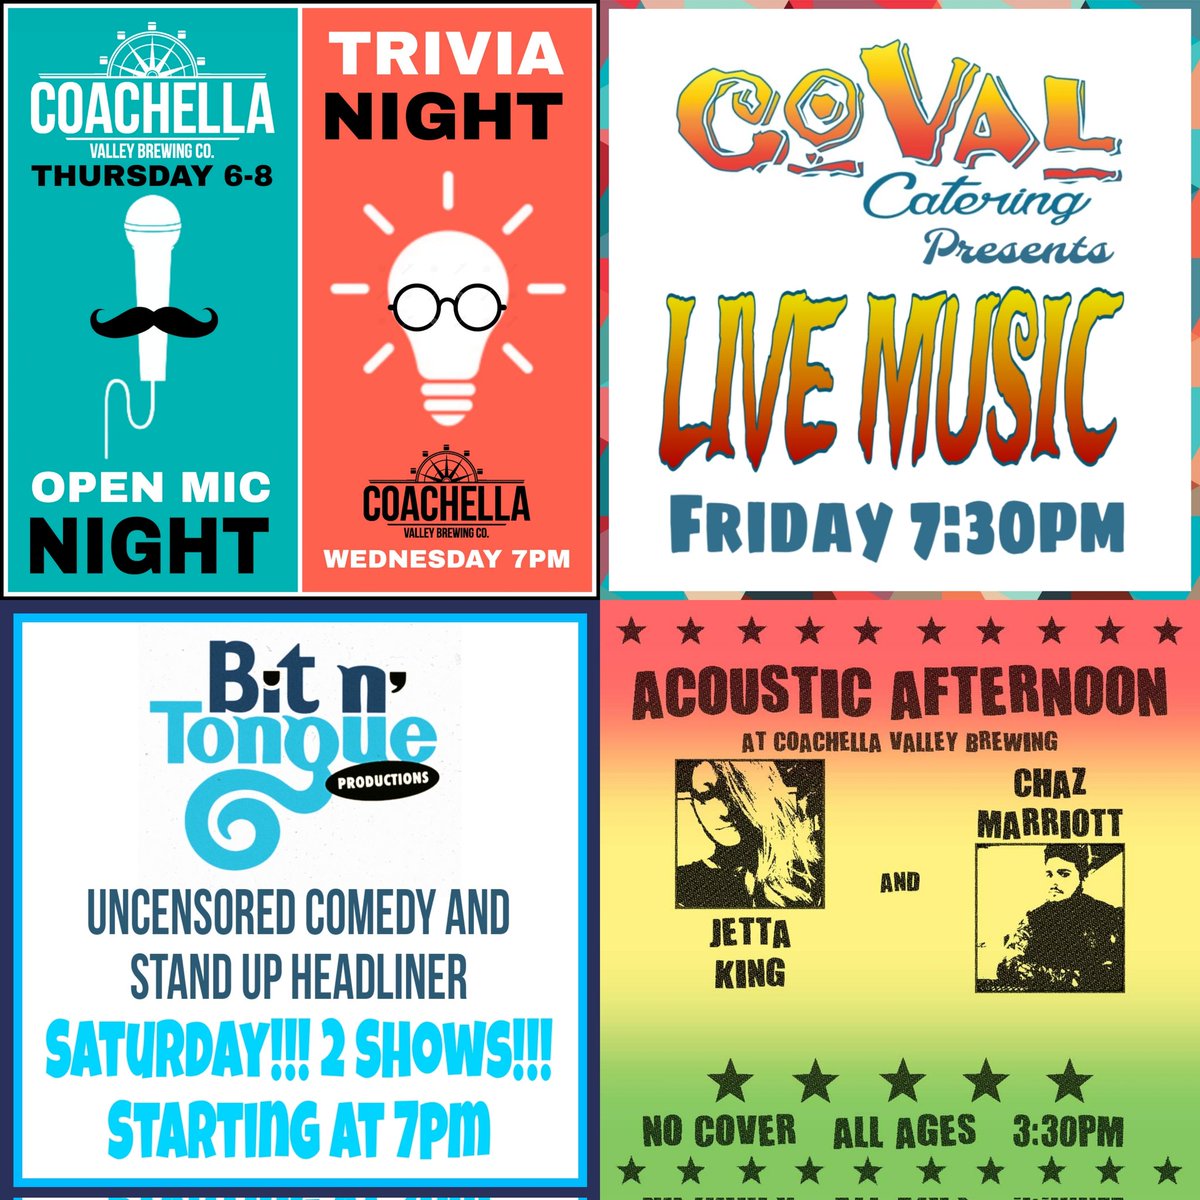 This week at CV Brewing! Wed-Trivia Thur-Open Mic Fri-Coval presents Live Music Sat-Bit N Tongue Comedy Sun-Acoustic Afternoon